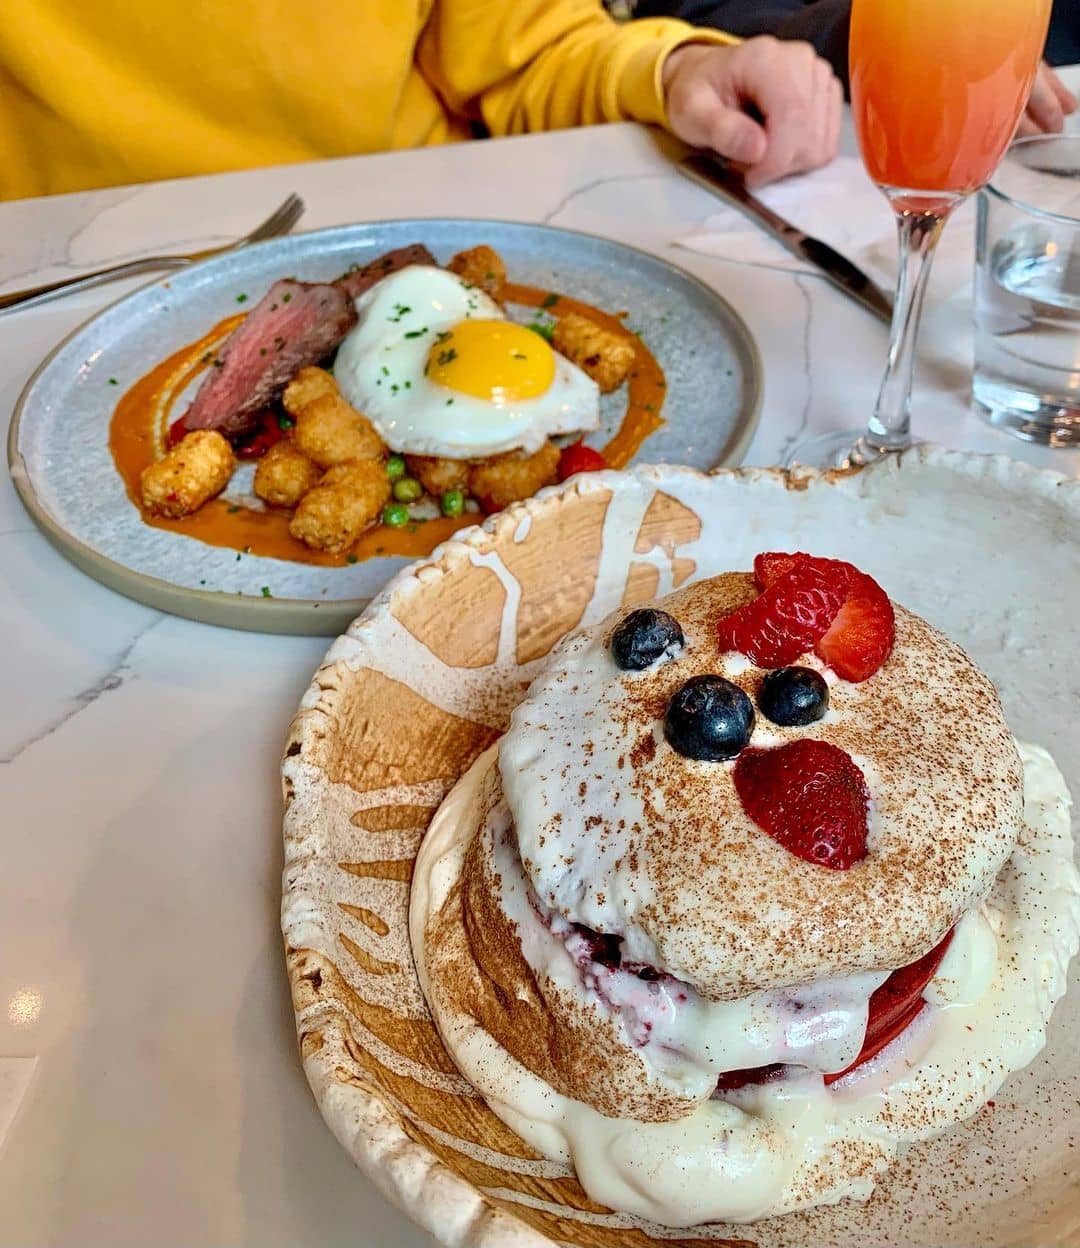 12 Best Brunch Spots In Toronto For A Hearty Meal (+ what to order)